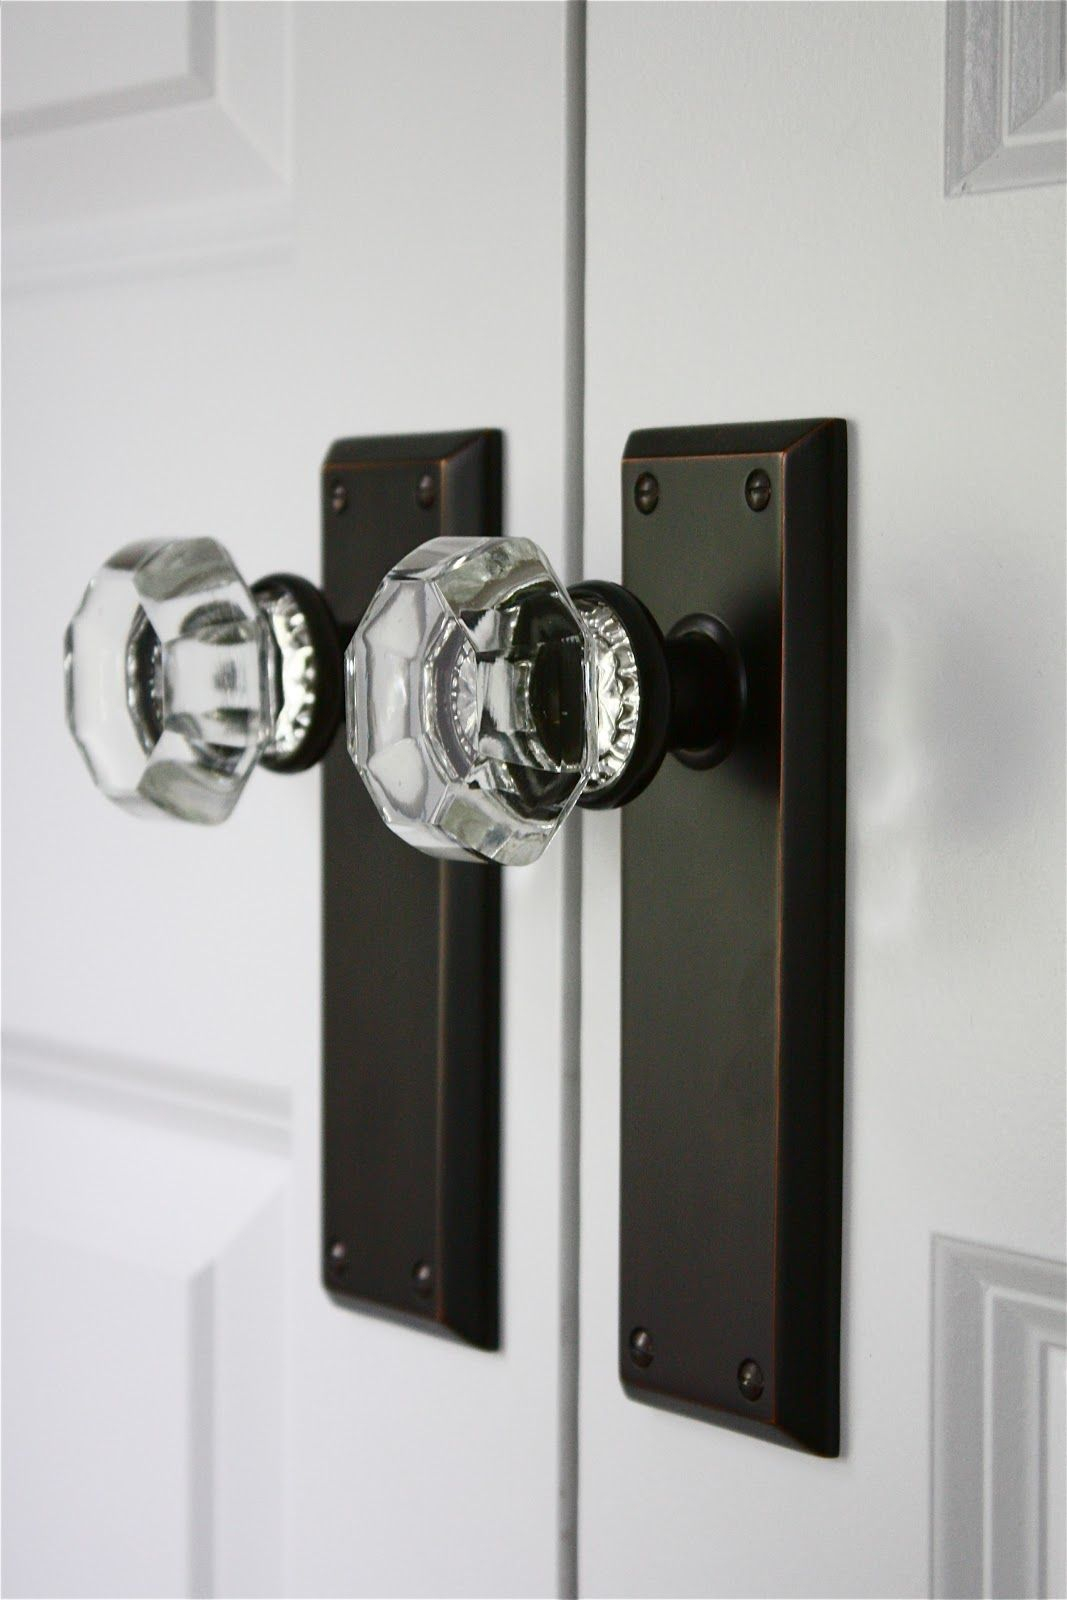 Crystal Door Knobs Home Details Add An Elegant Touch To The Home with dimensions 1067 X 1600